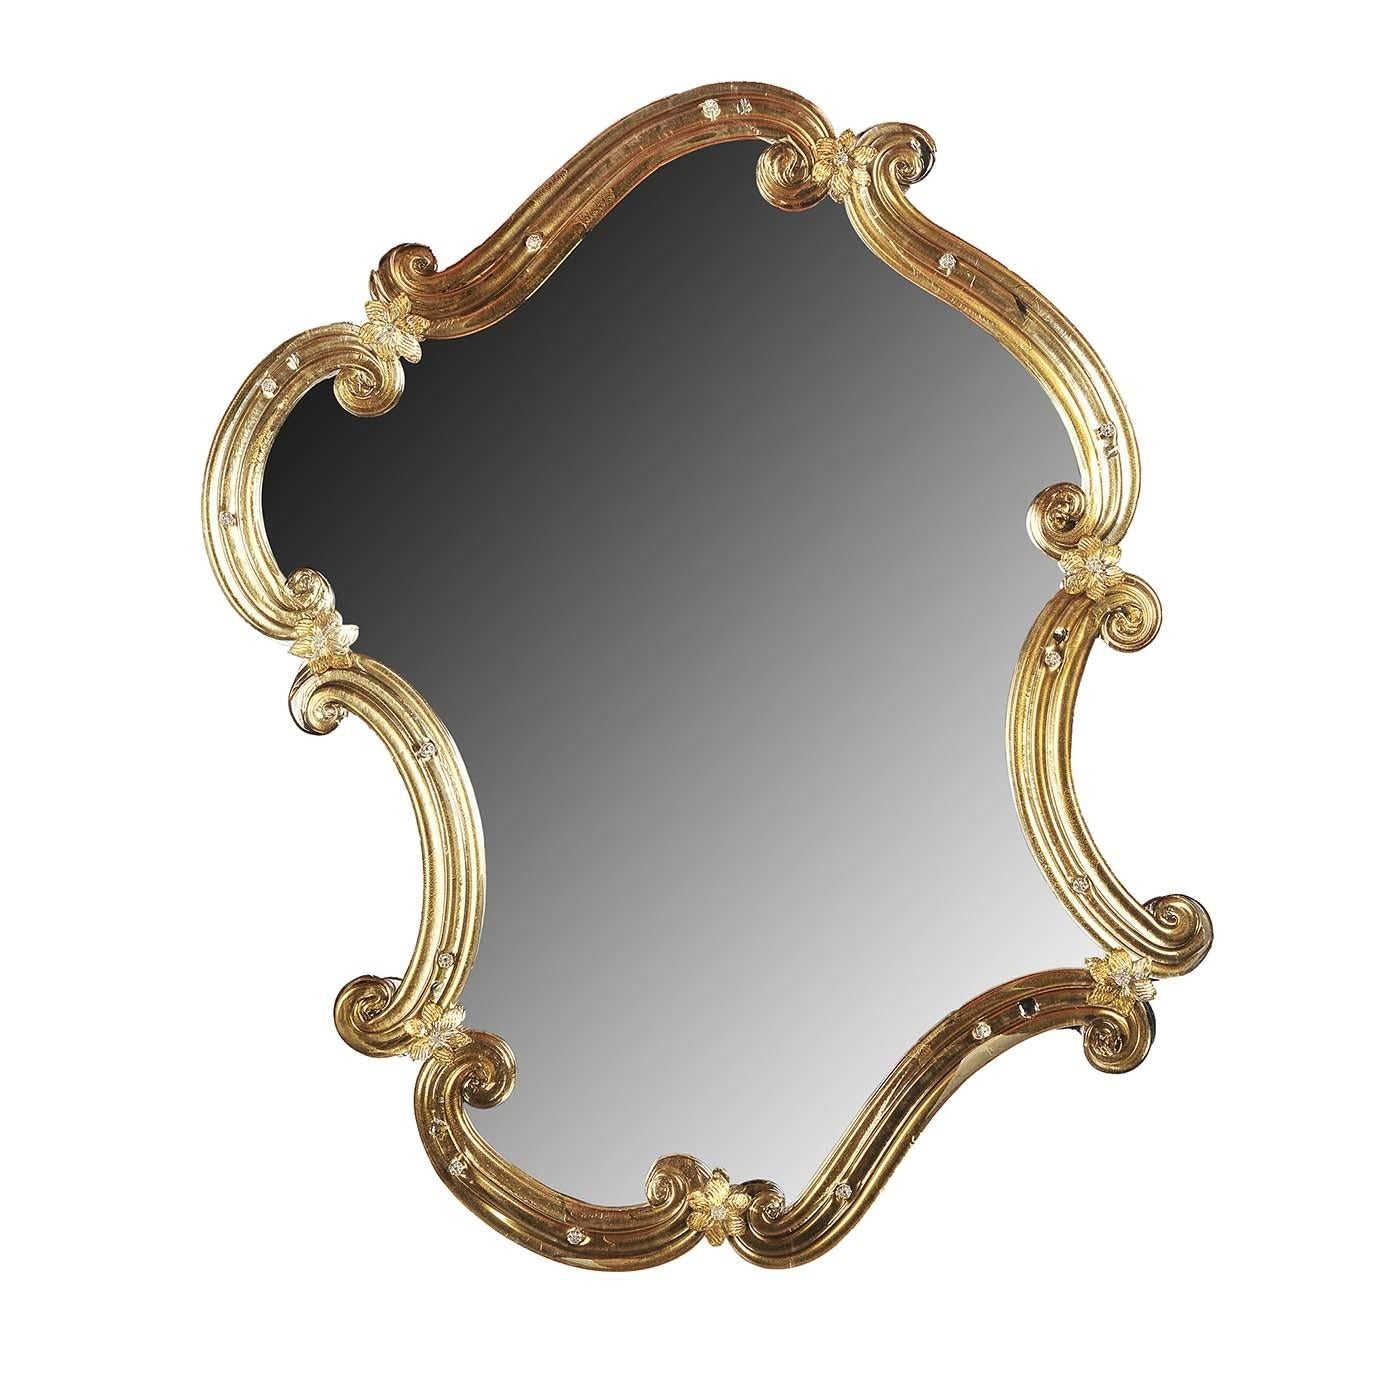 A stunning decorative accent and a superb work of art that will infuse an elegant interior with lavish sophistication, this mirror is part of the Storti collection, distinctive for the asymmetric and sinuous shape of their frames. Entirely crafted